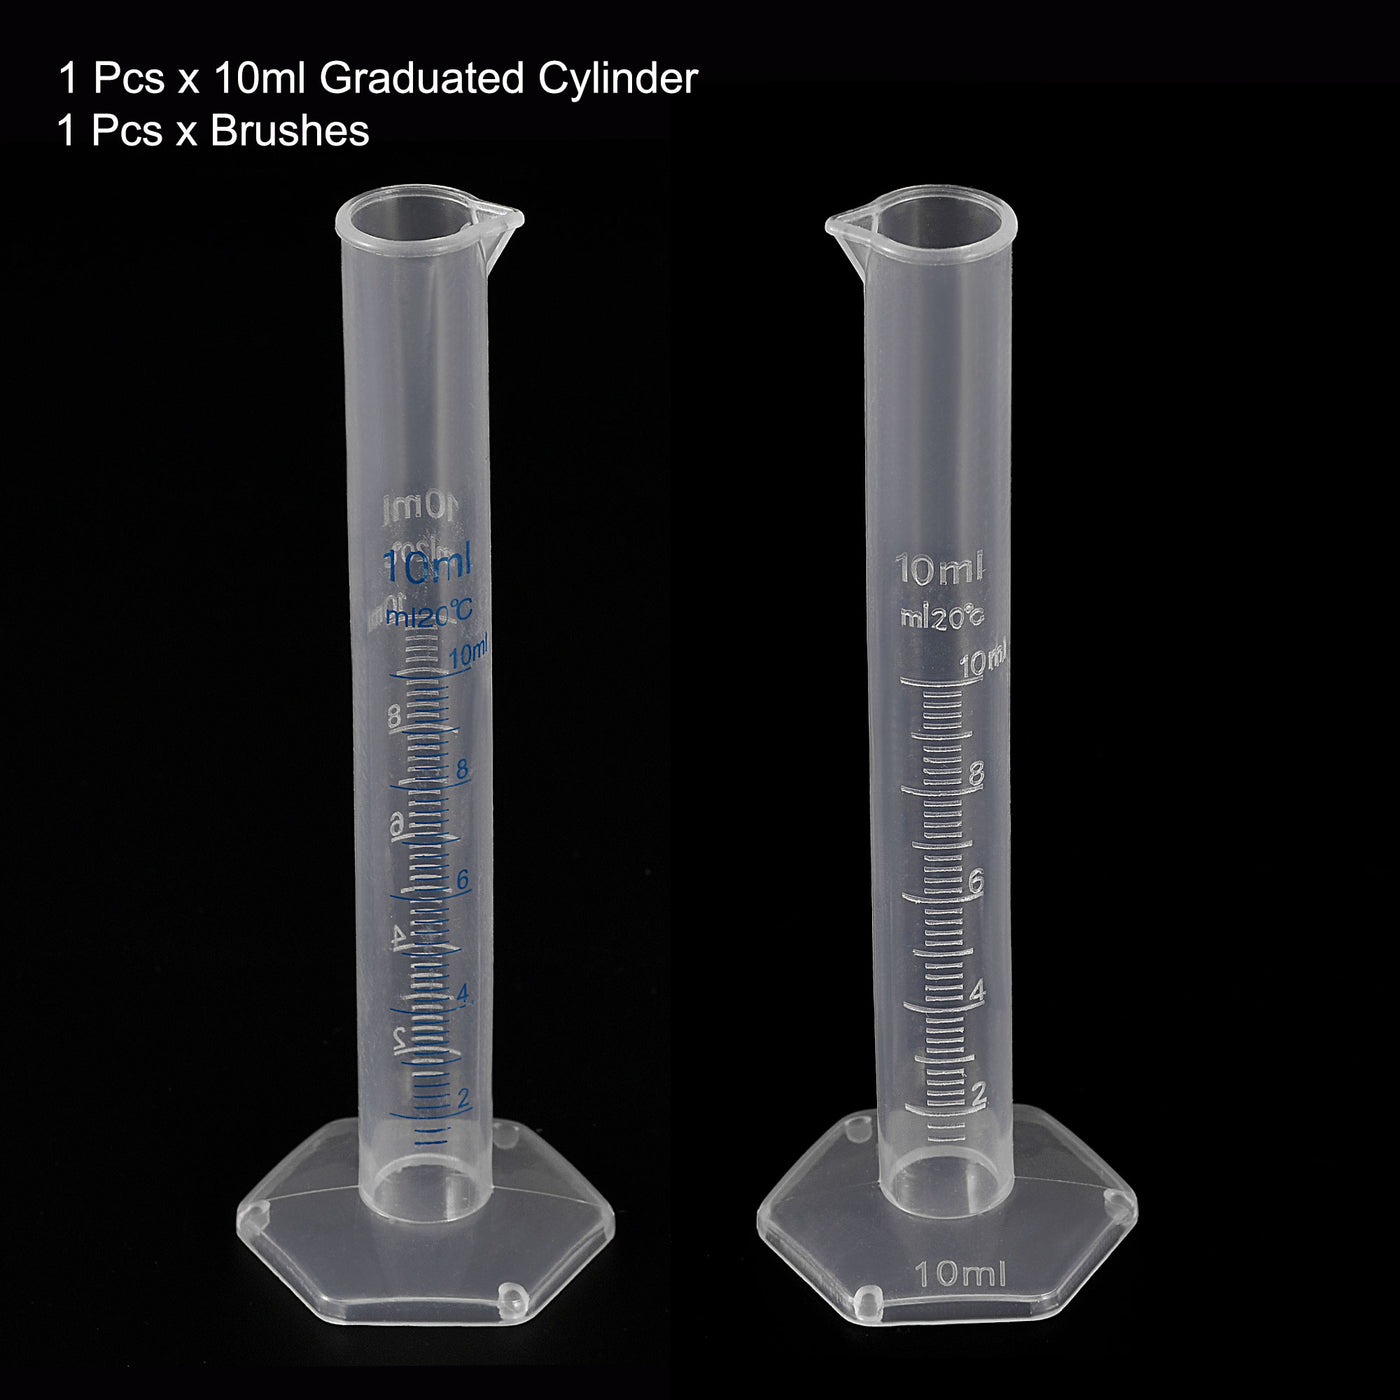 uxcell Uxcell Plastic Graduated Cylinder, 10ml Measuring Cylinder with 1 Brush, 2in1 Set for Science Lab